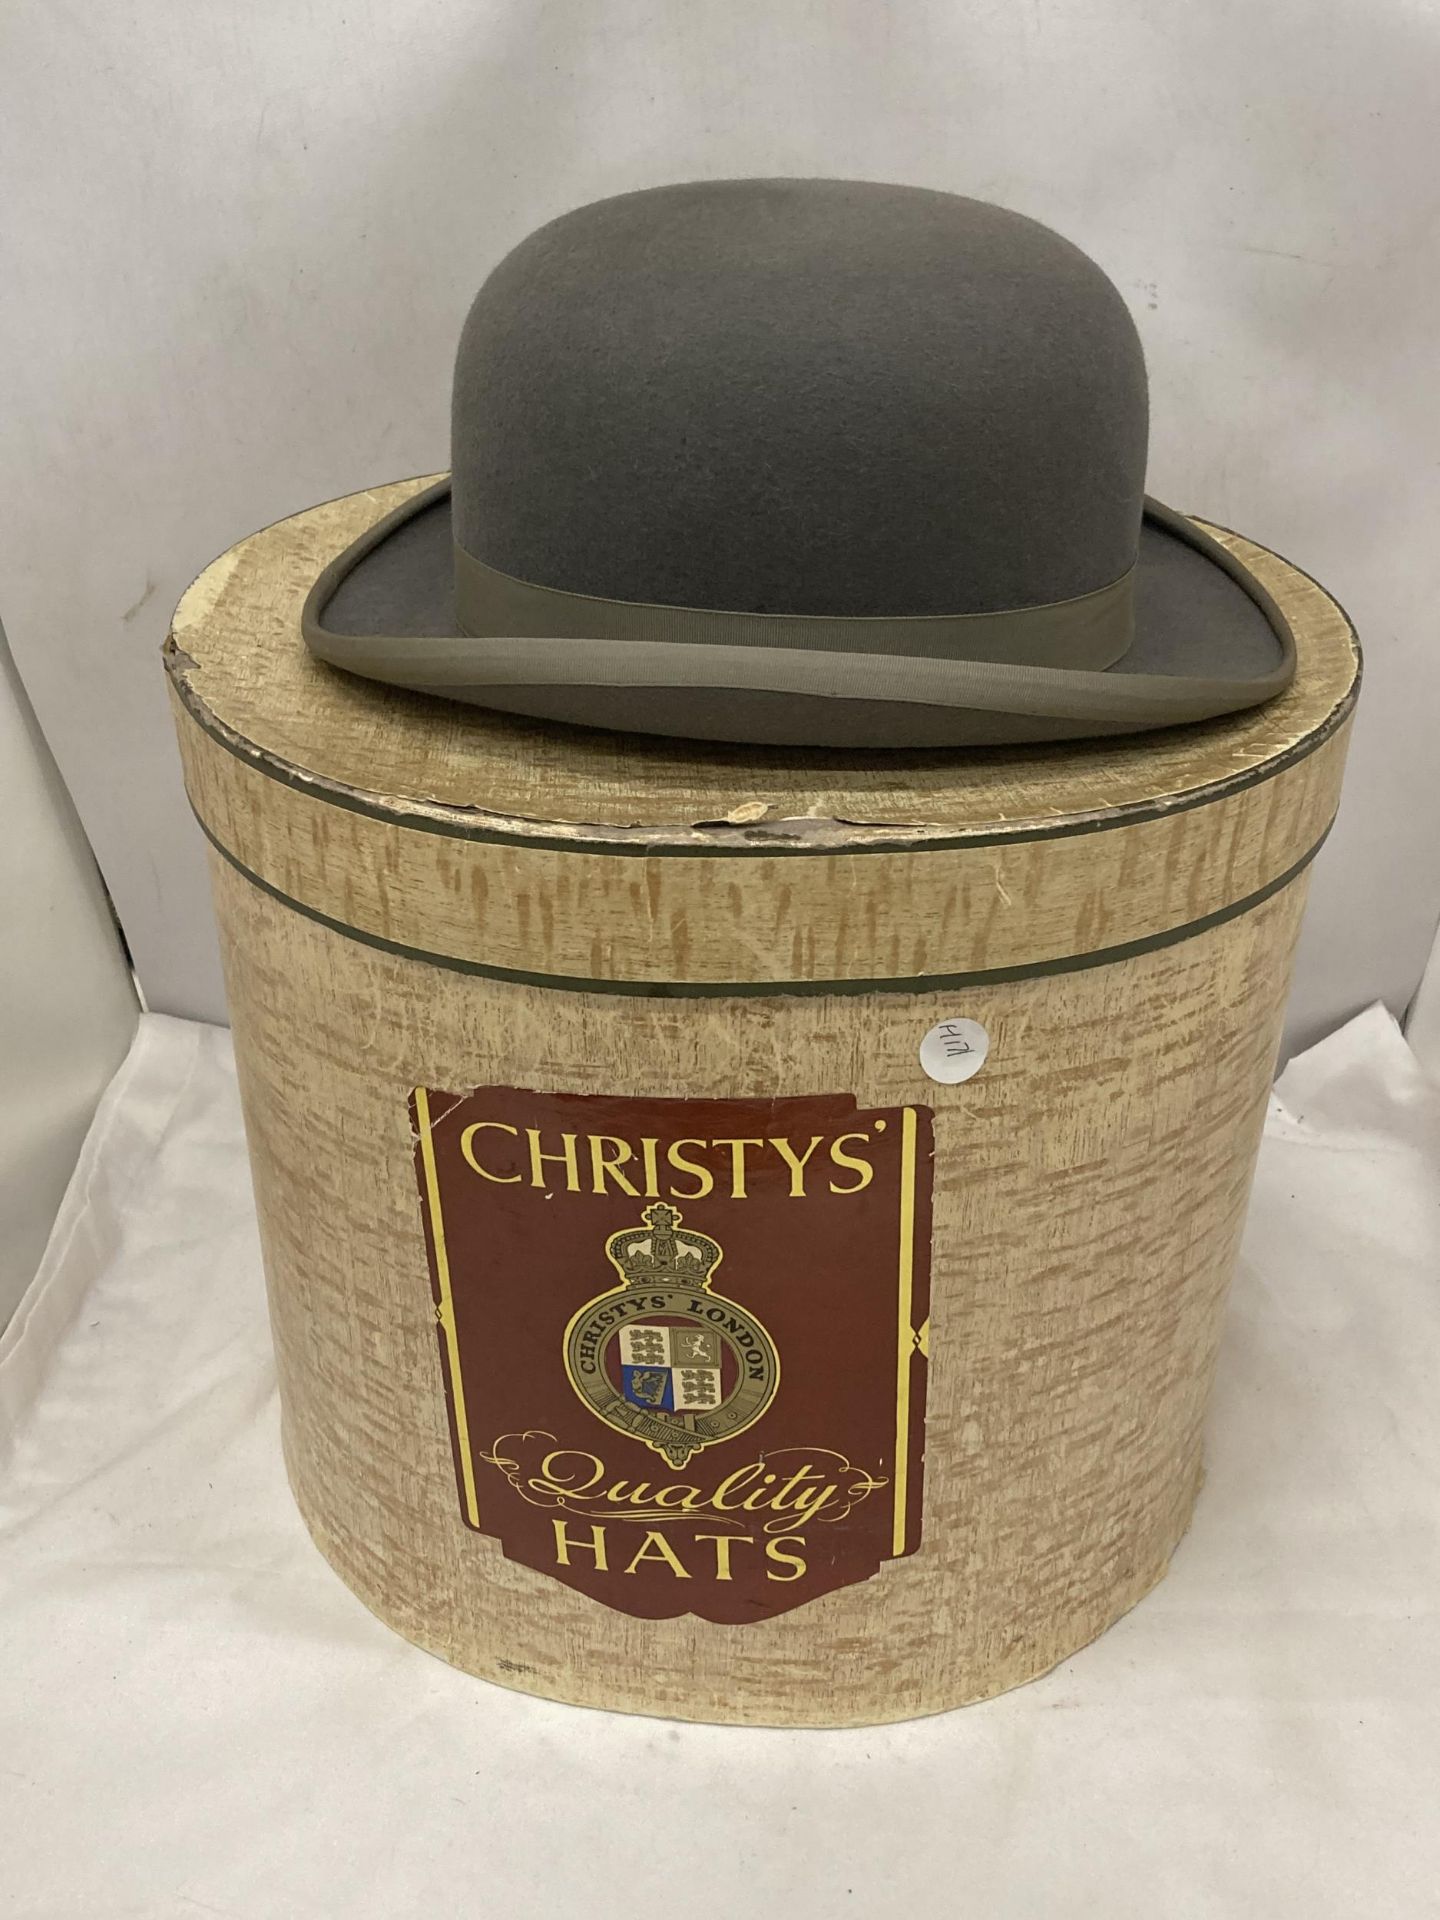 A CHRISTYS LONDON GREY BOWLER HAT IN A CHRISTYS BOXM - SIZE 7/57